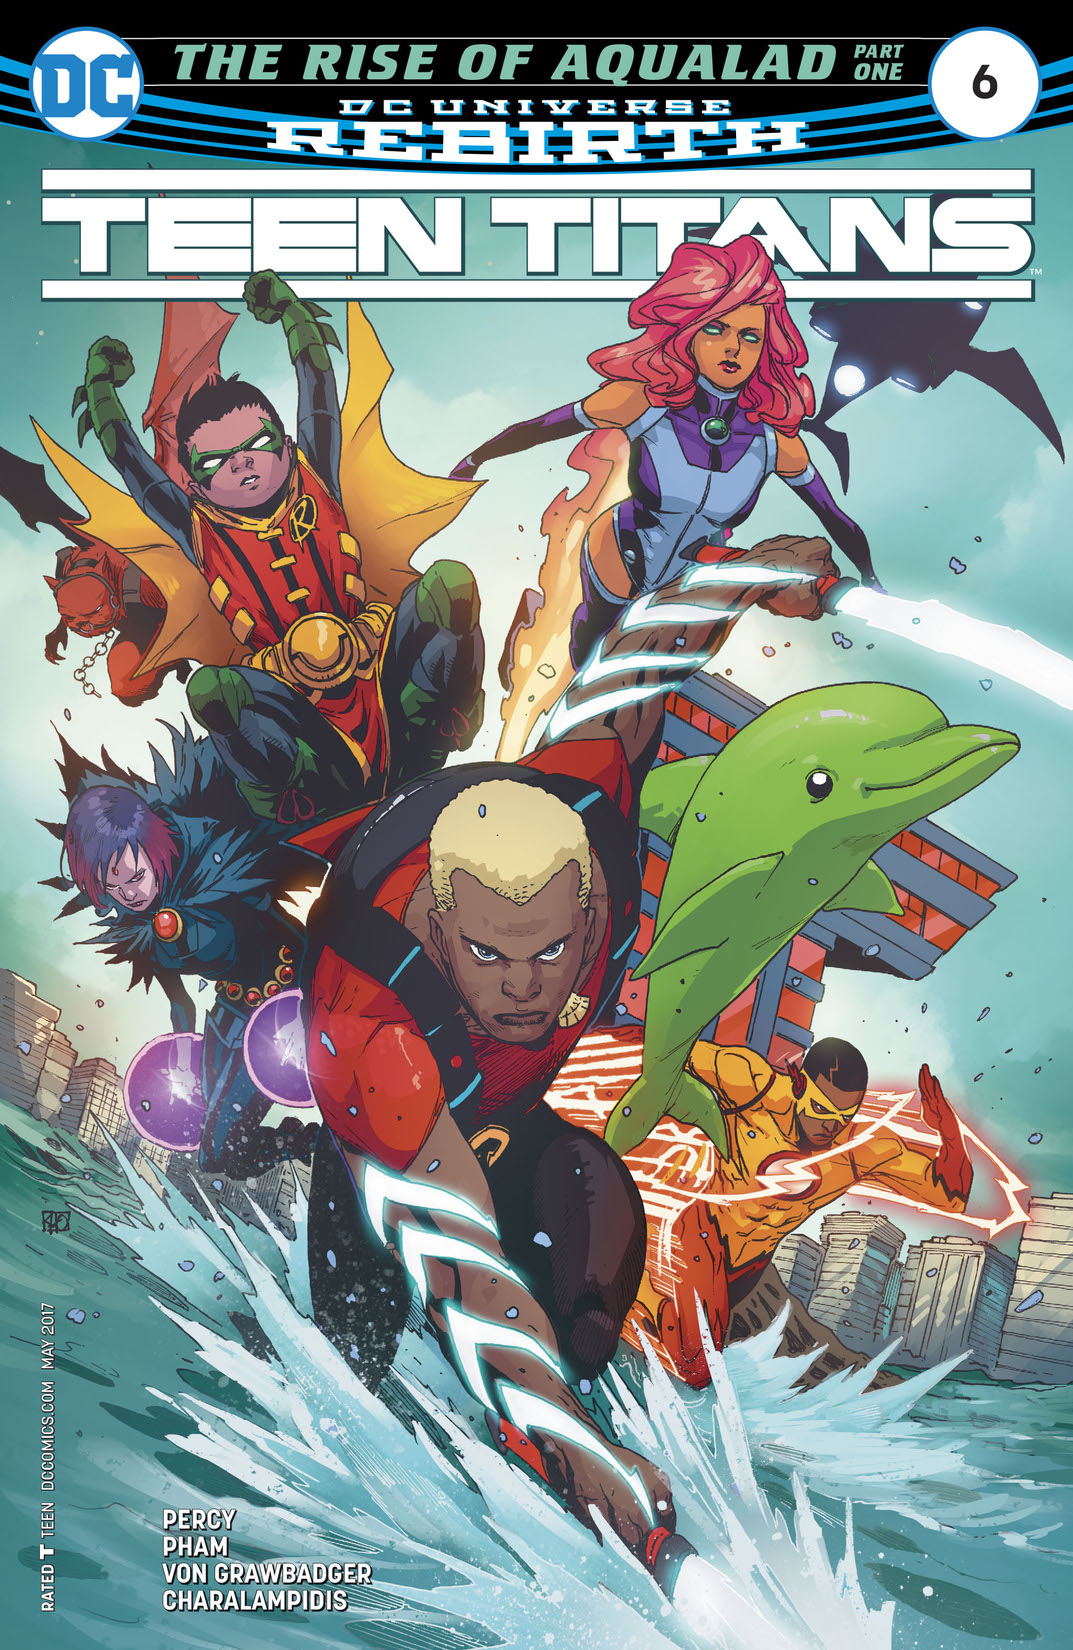 Teen Titans (2016-) #6 preview images